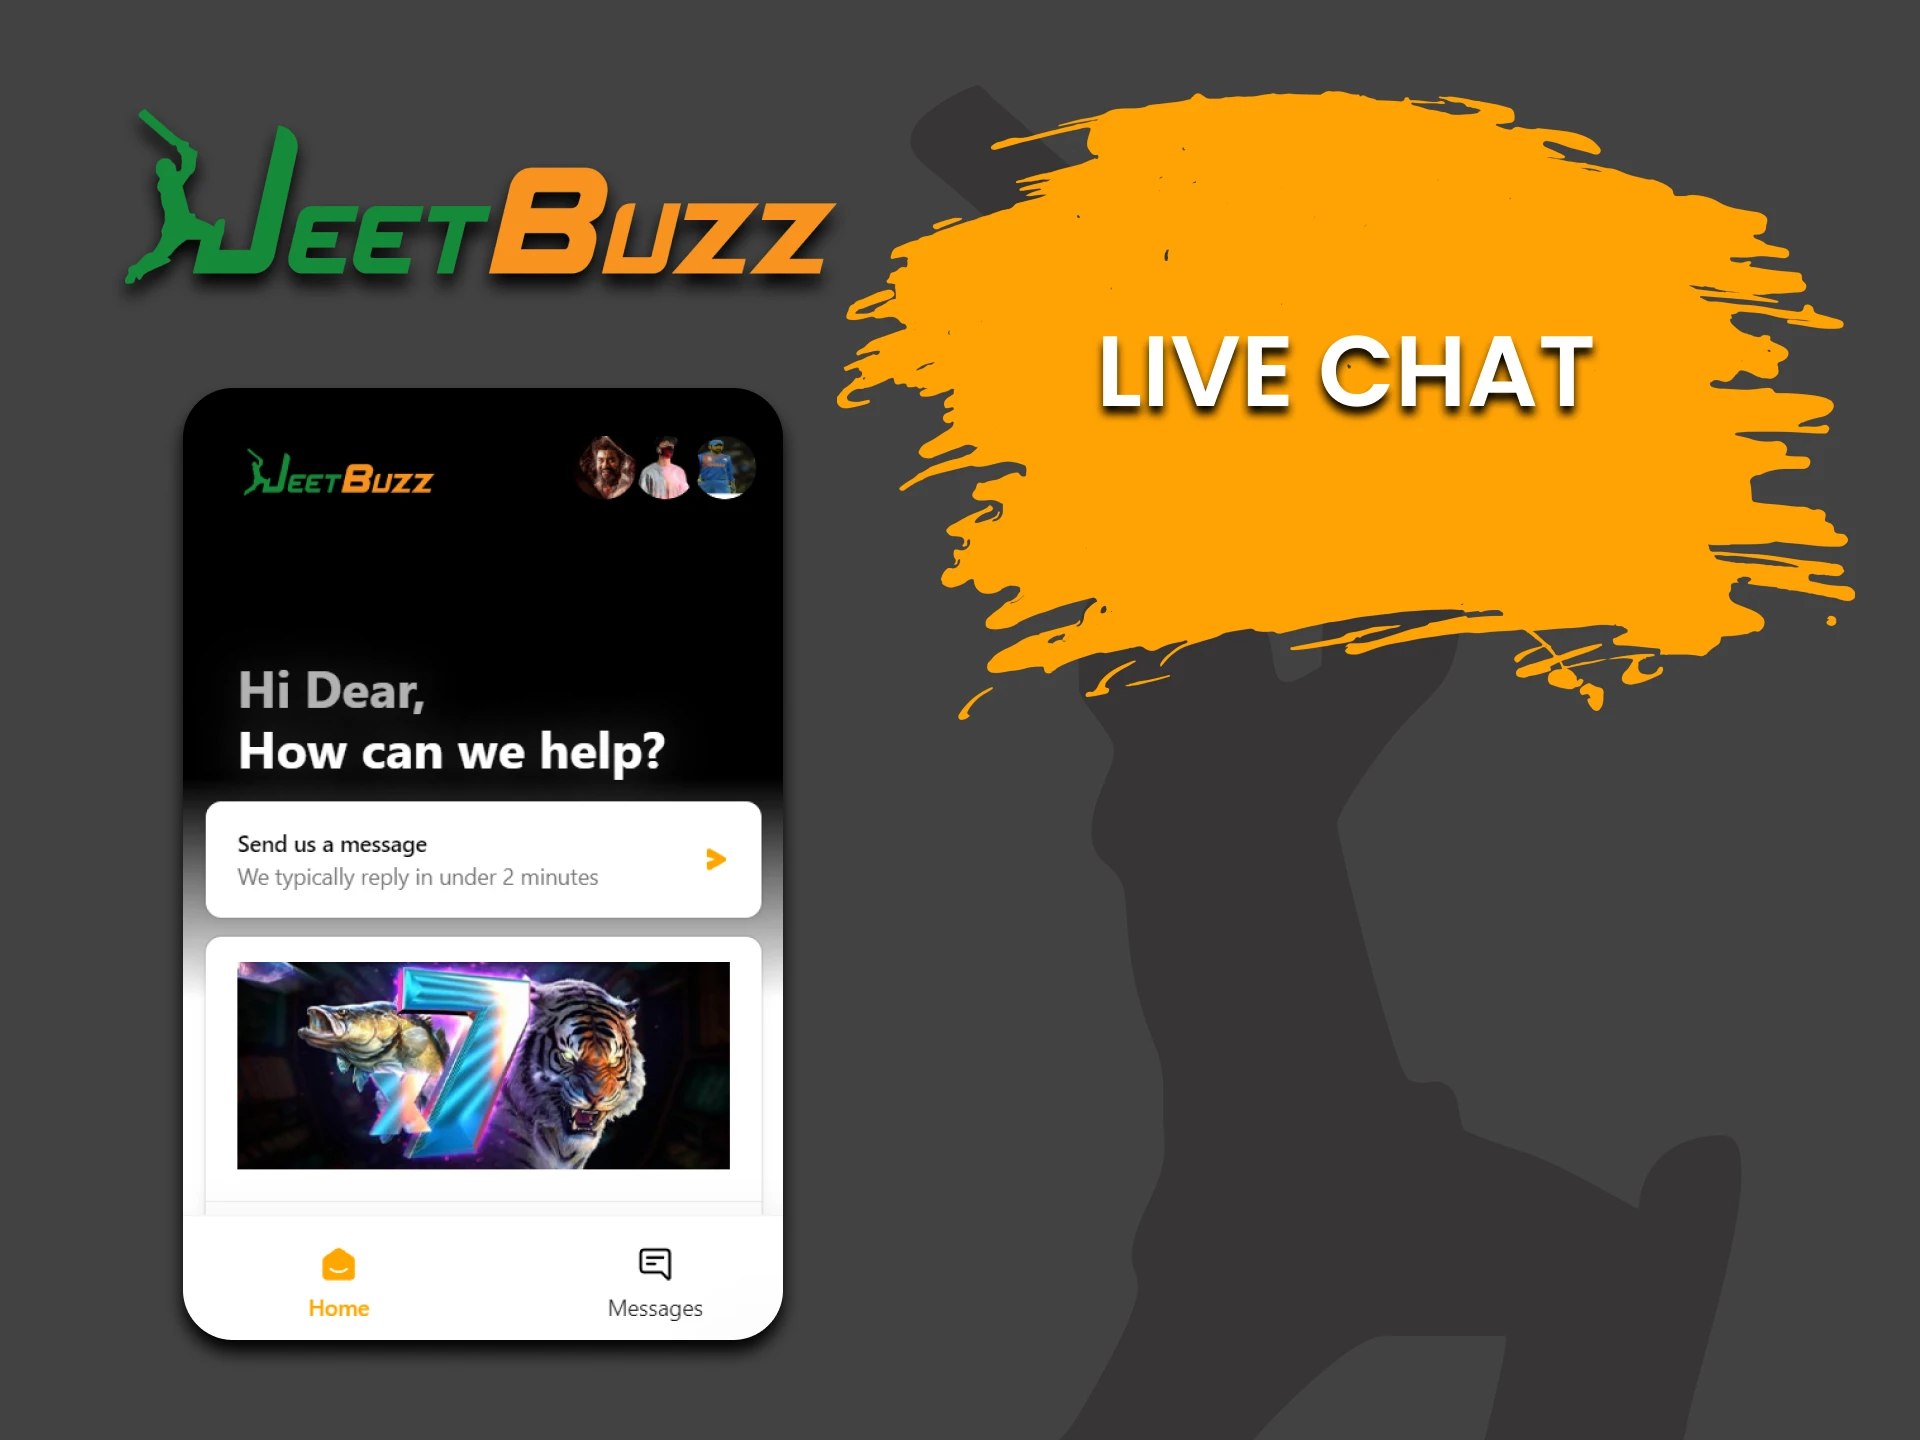 The JeetBuzz website has a live chat.